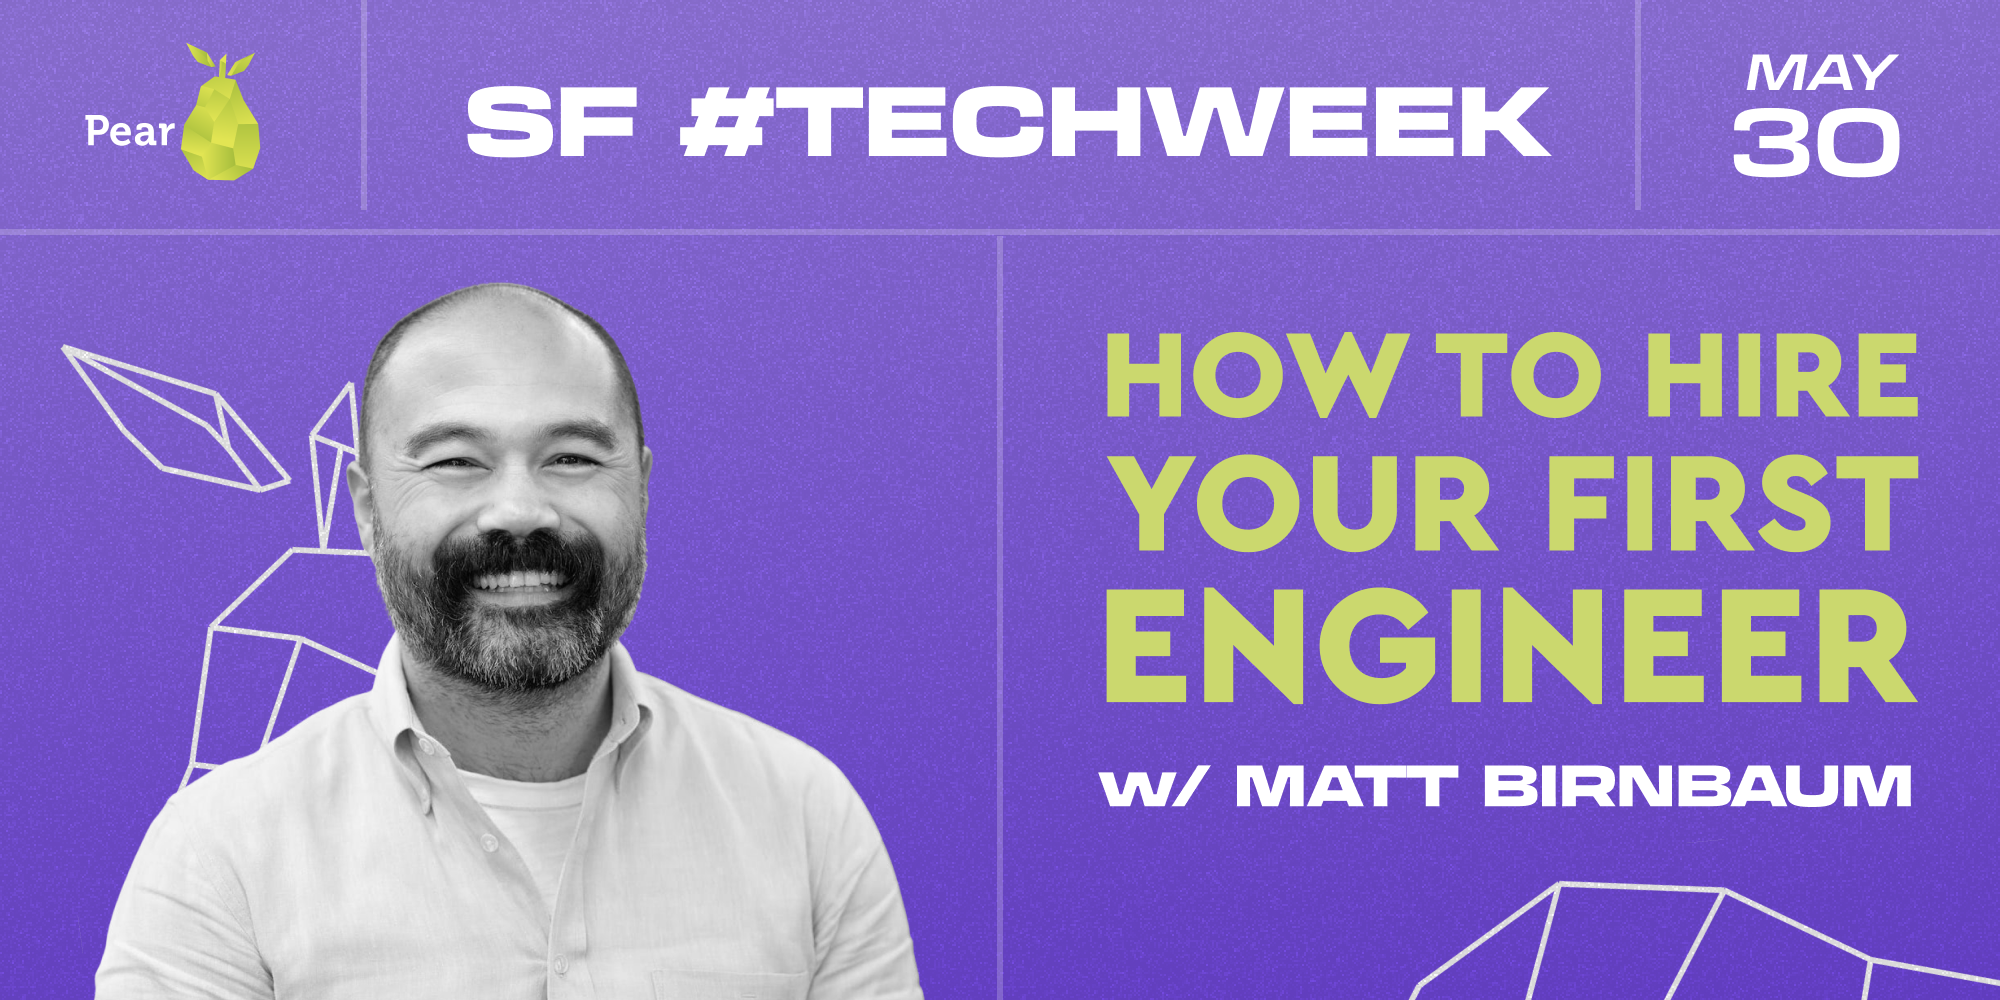 resources SF #TechWeek x Pear VC: How to hire your first engineer with Matt Birnbaum, Talent Partner at Pear VC